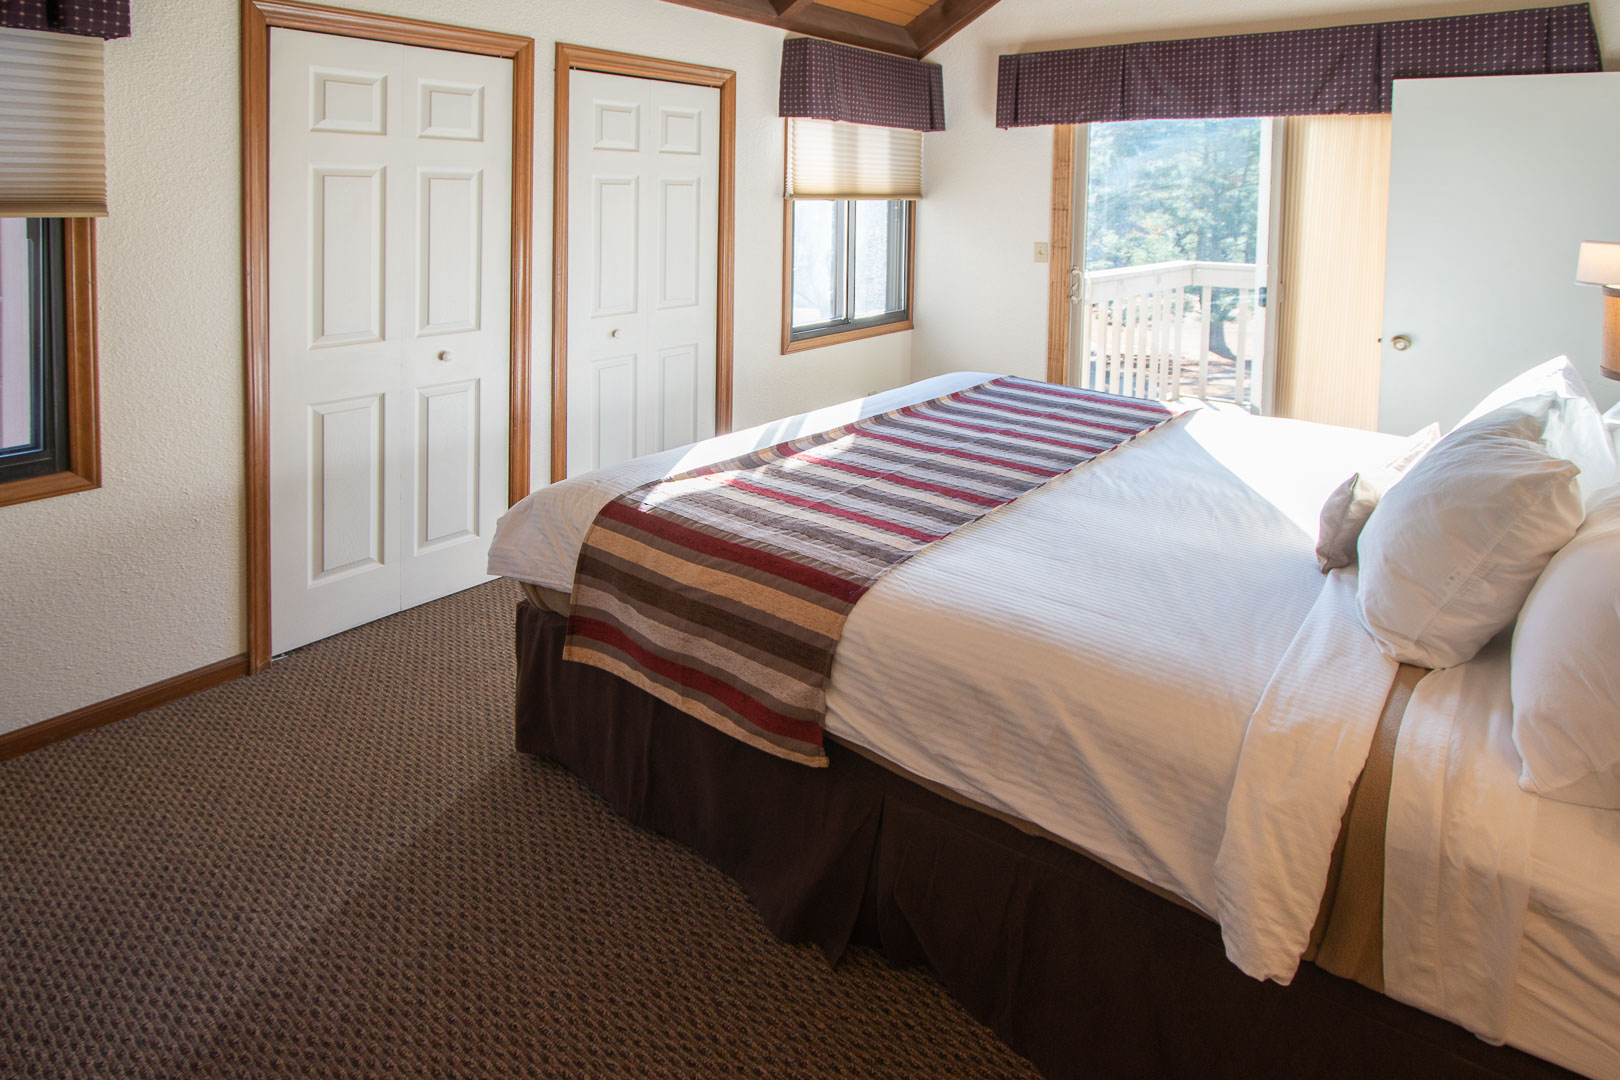 A cozy master bedroom with a view at VRI's Mountain Loft Resort in North Carolina.